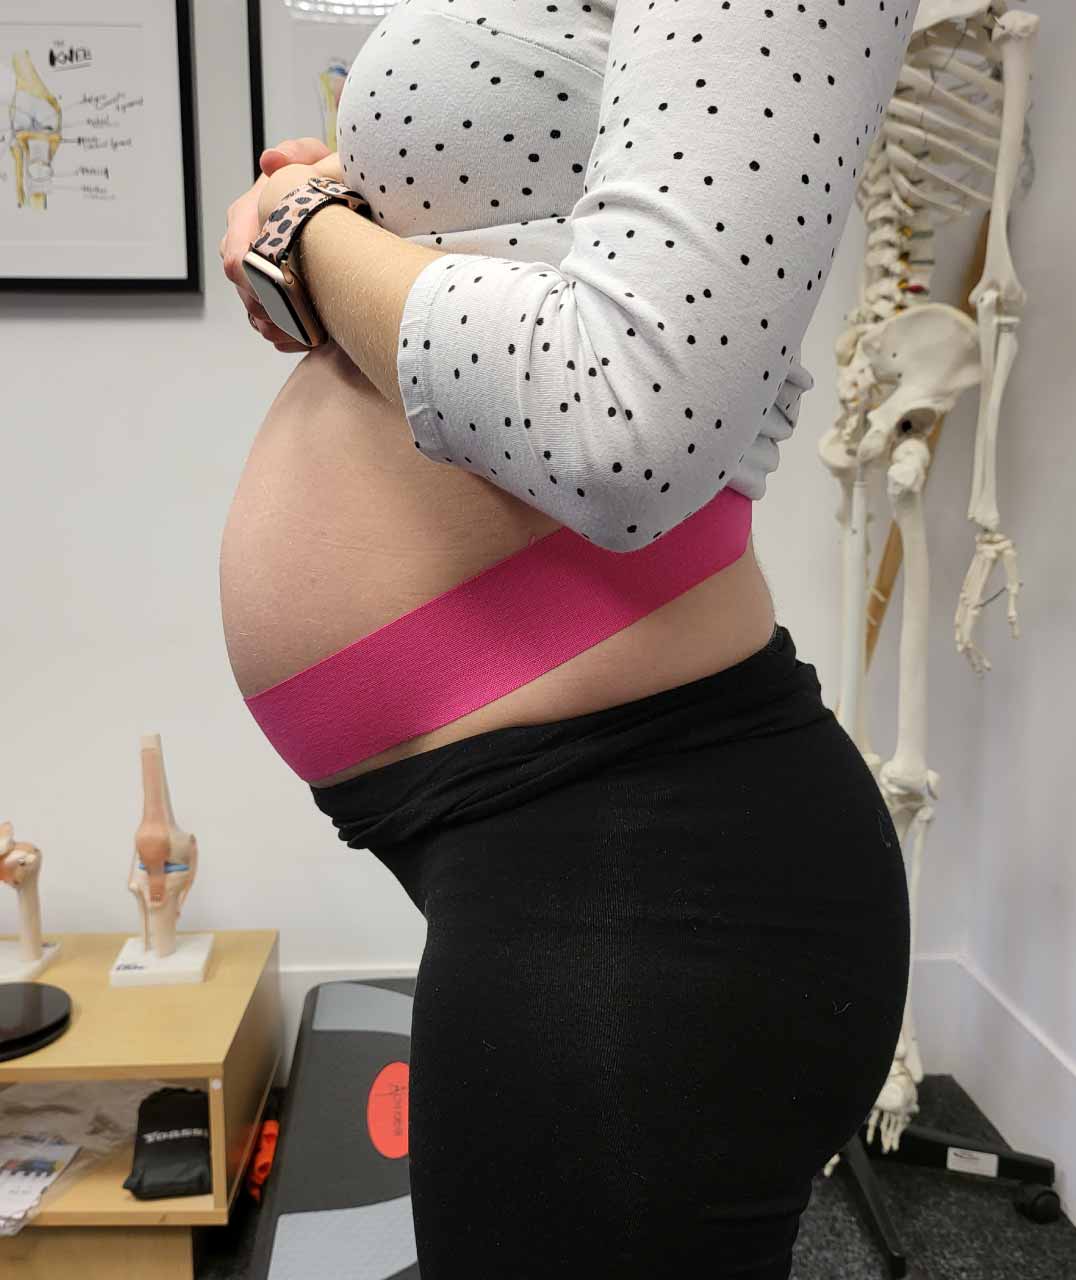 pregnancy, sports, tape, osteopathy, back pain, hip pain